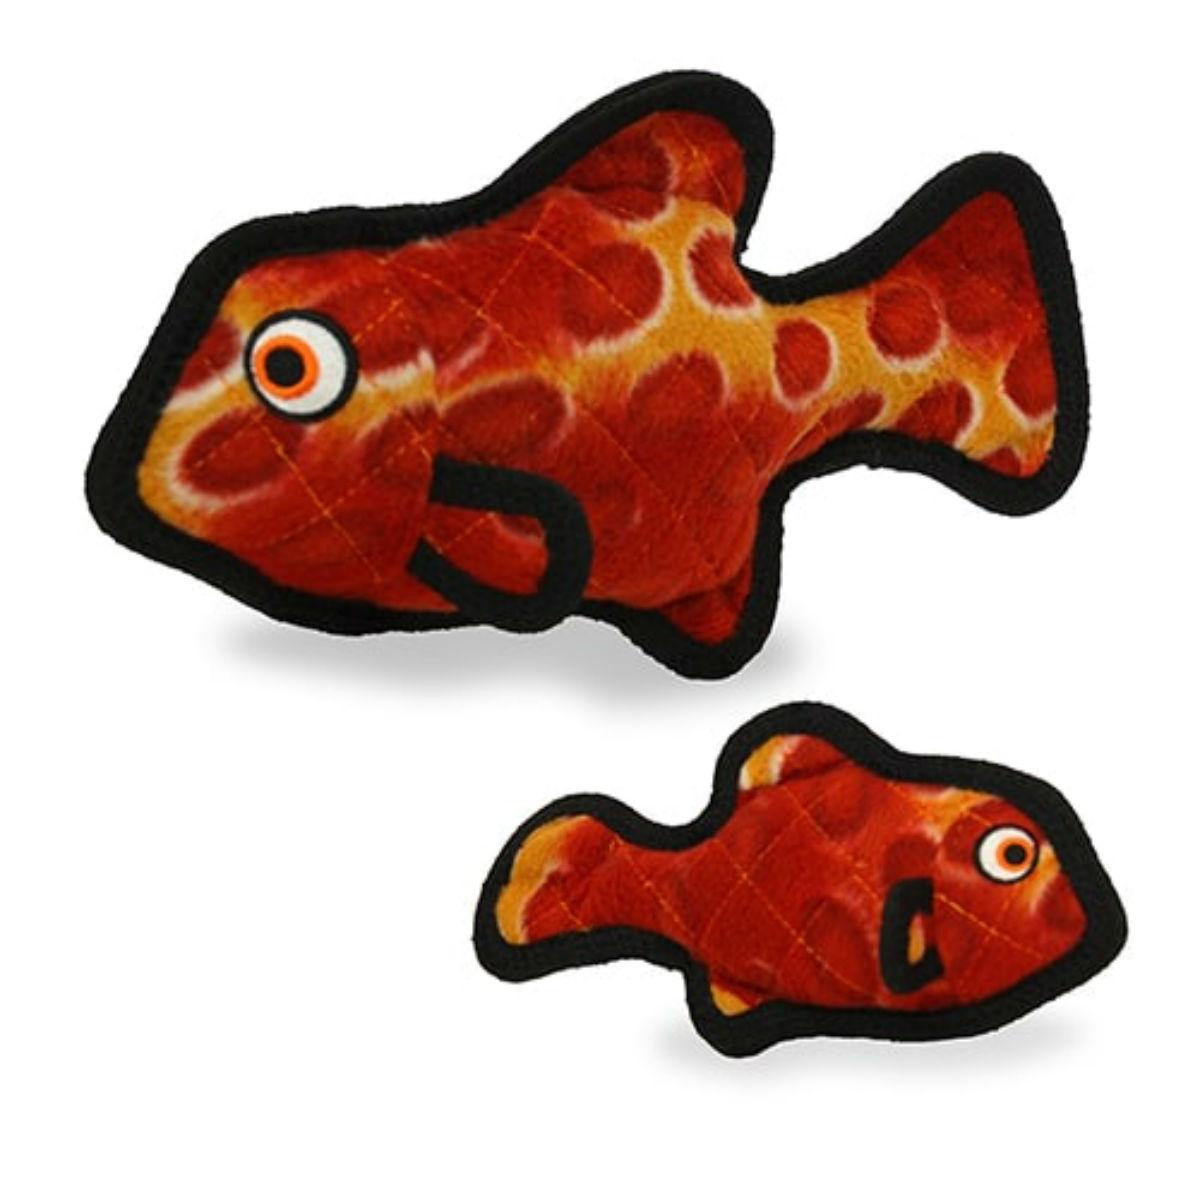 Tuffy Ocean Creatures Dog Toy - Red Fish